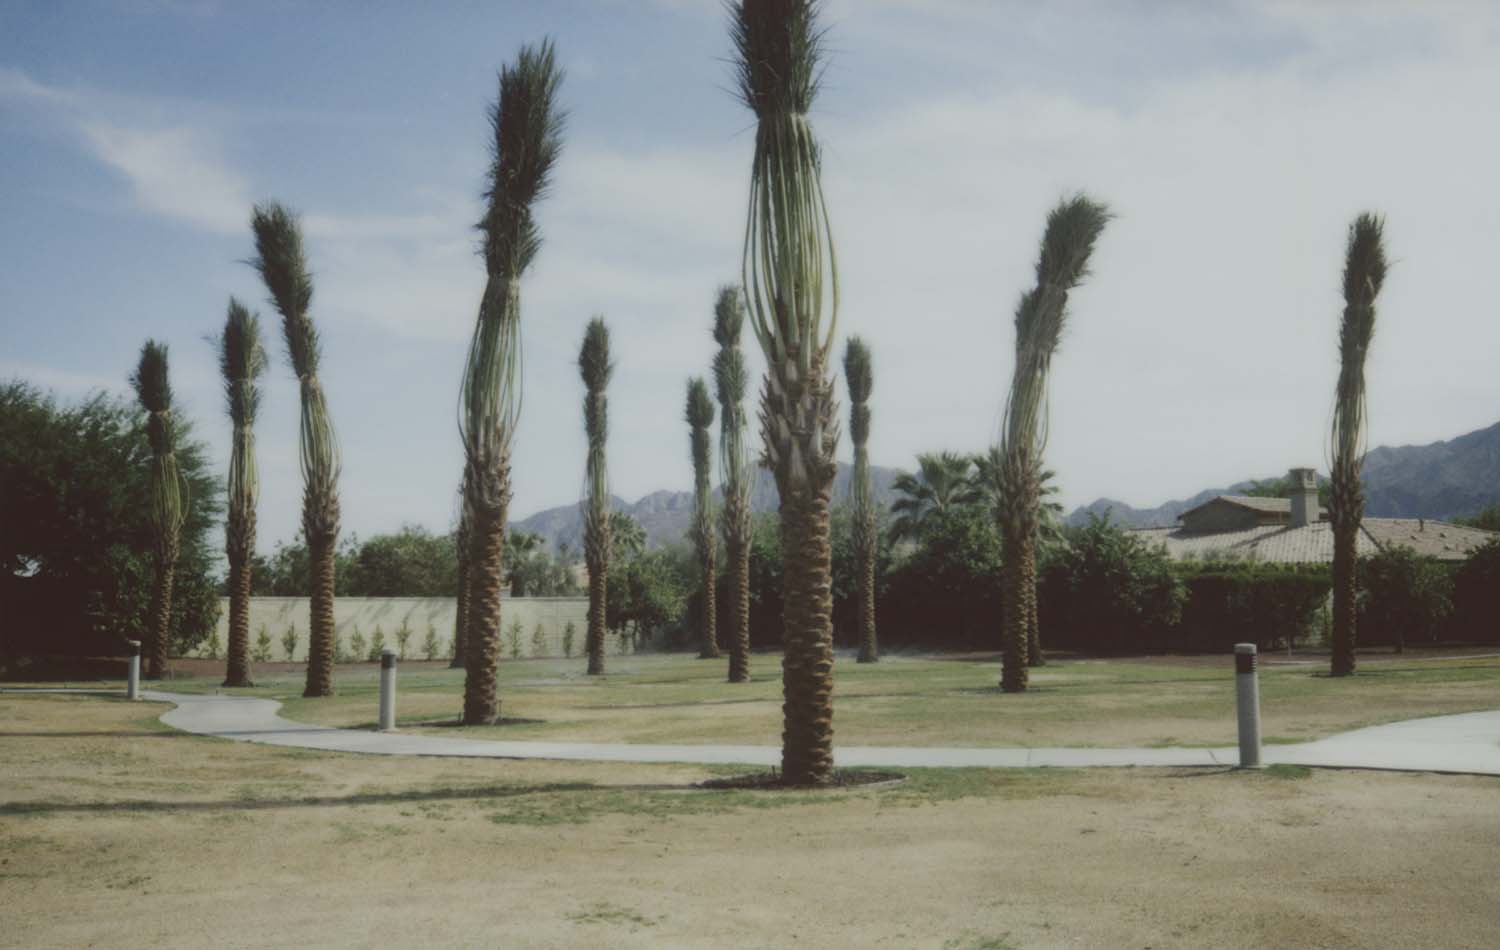 John Brian King, Riviera: Photographs of Palm Springs Published by Spurl Editions